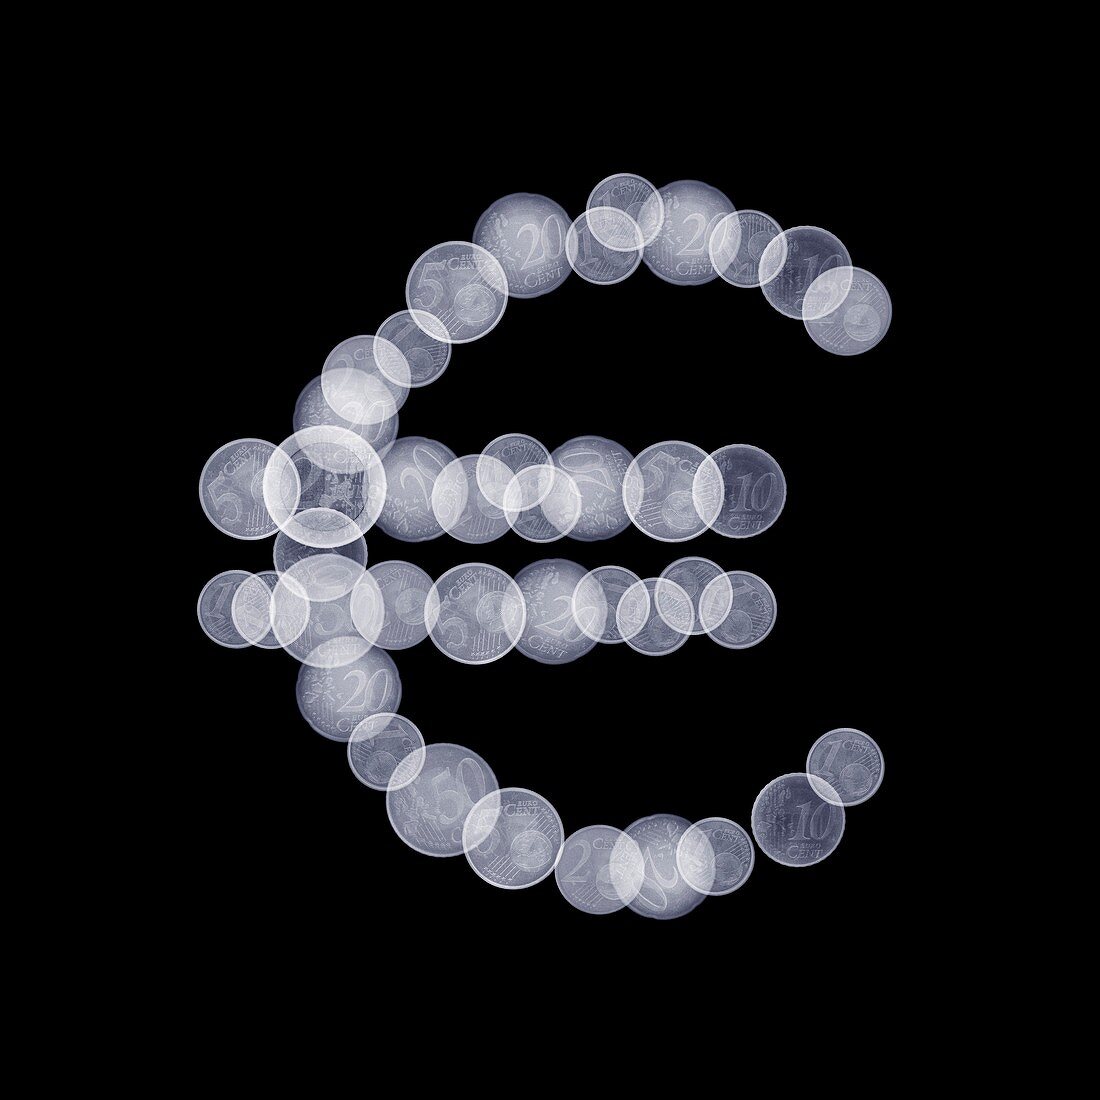 Coins forming Euro symbol, X-ray